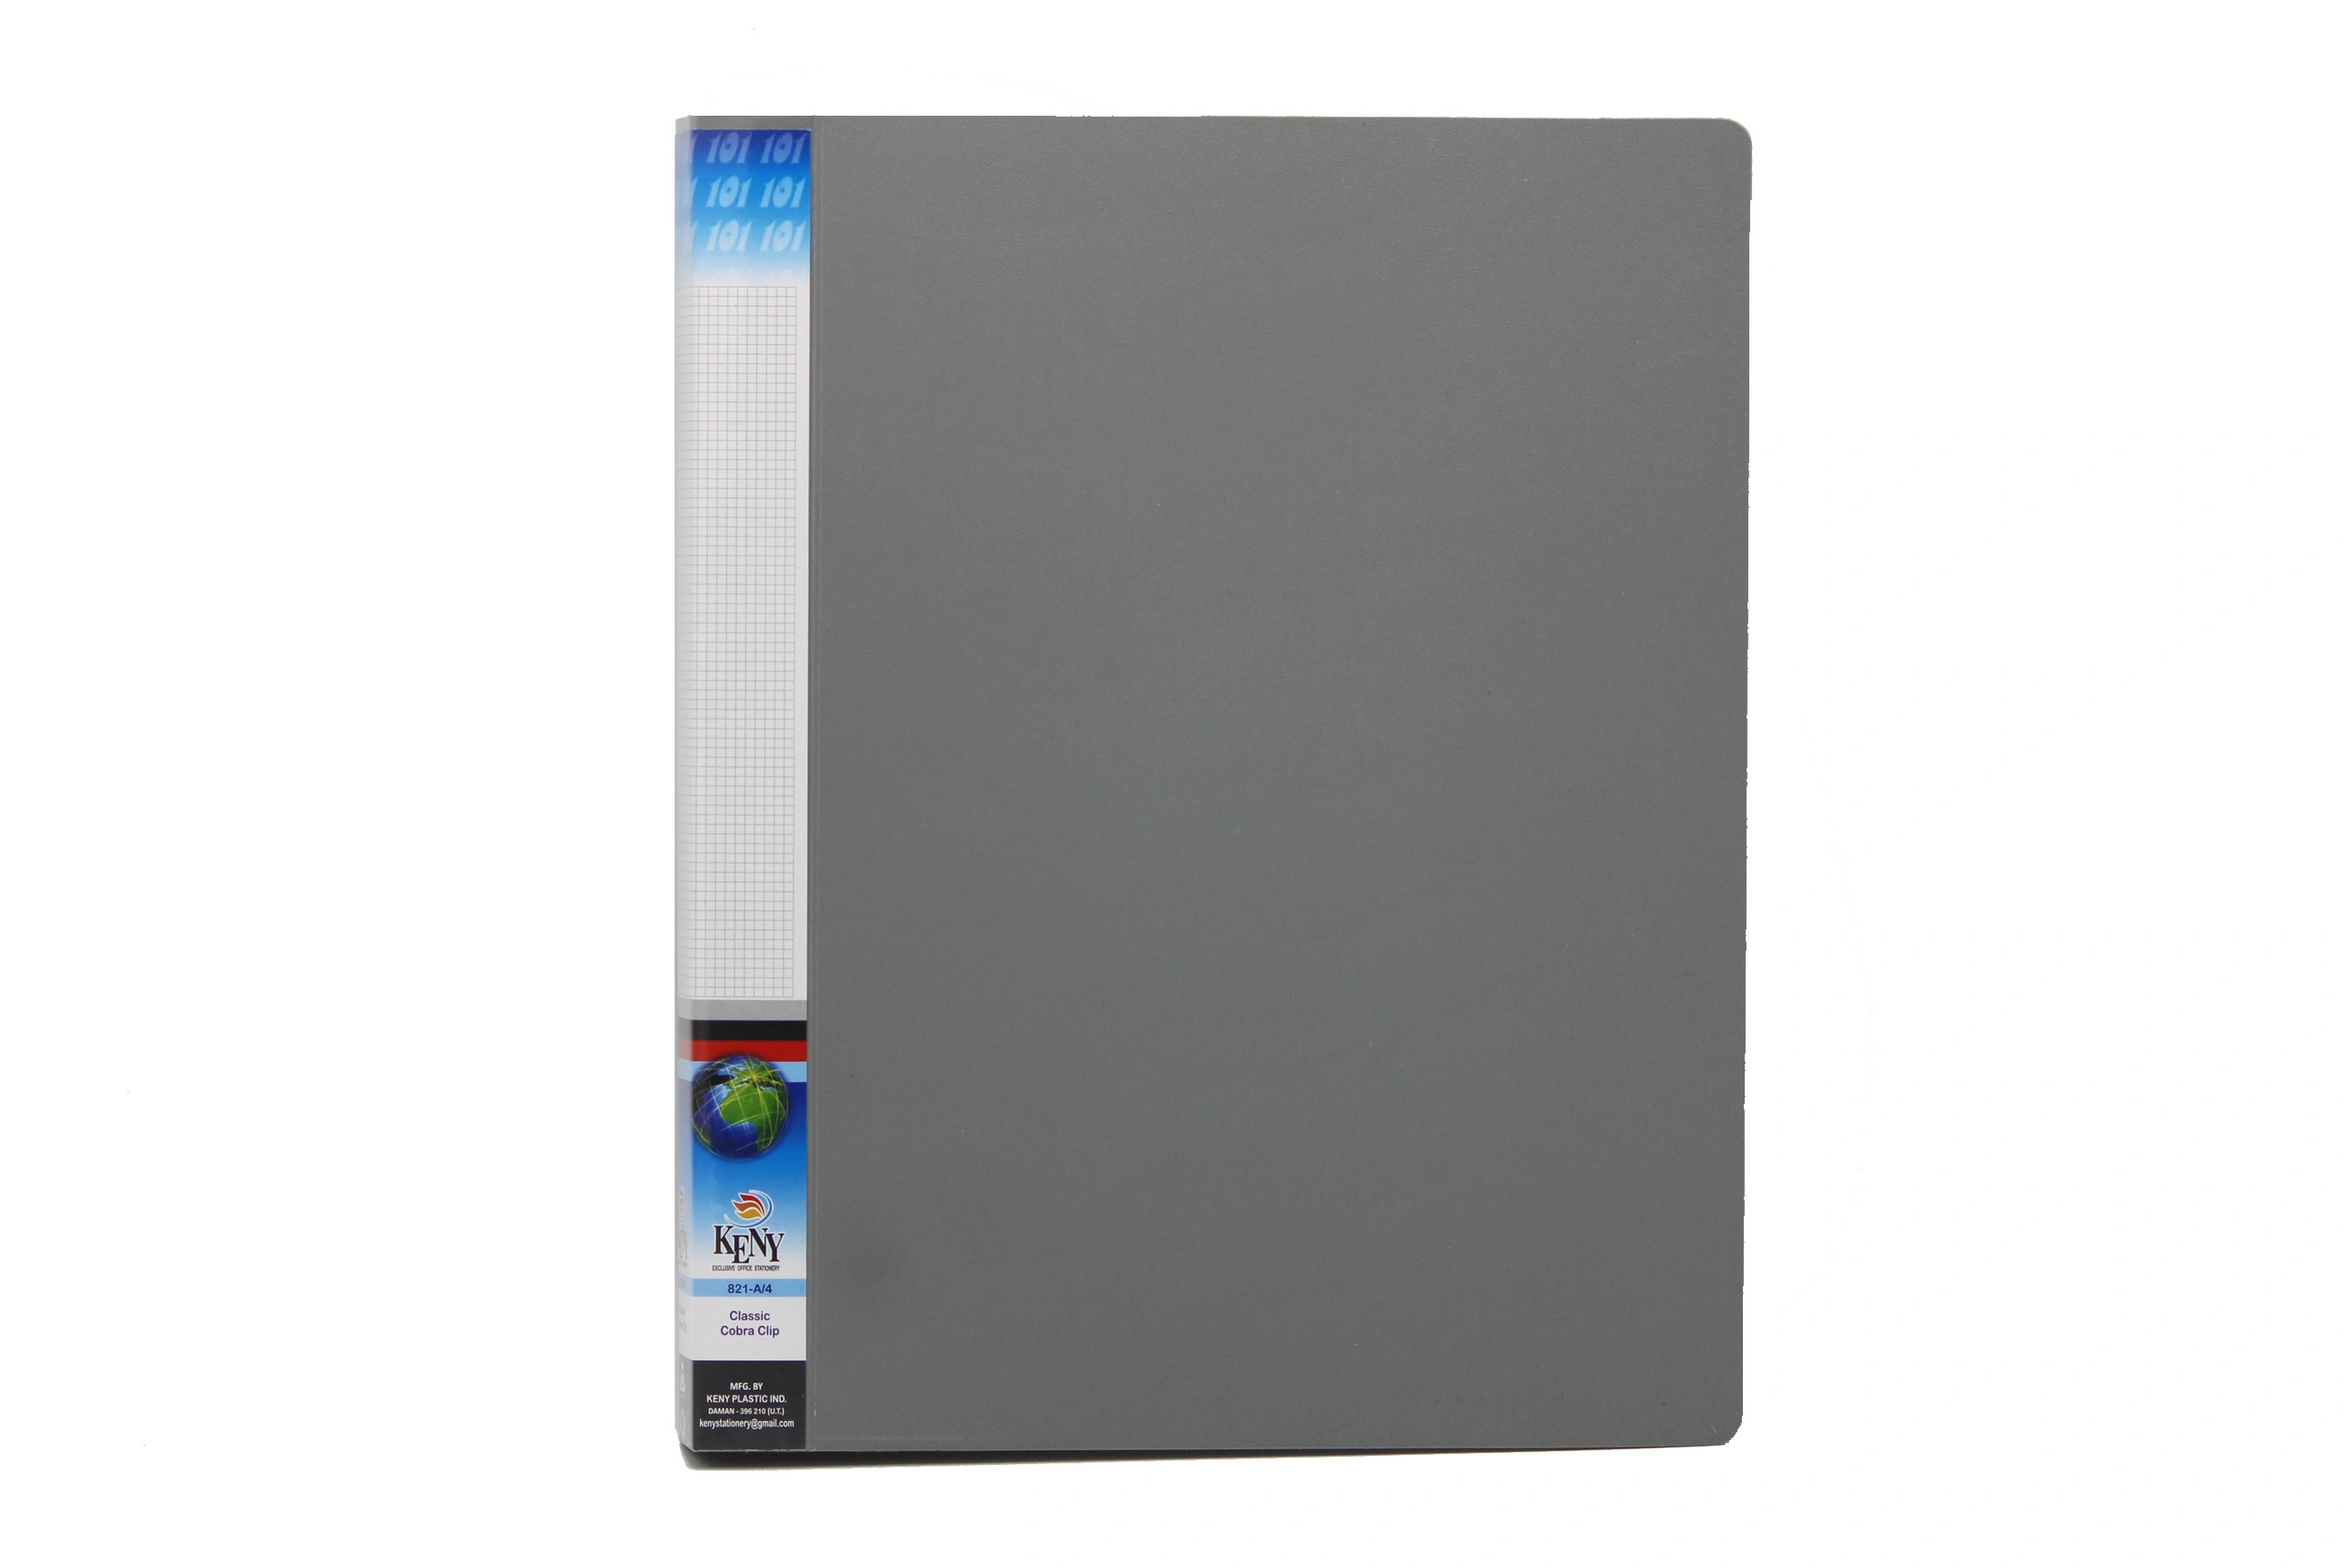 Keny Ring Binder | Best for A4 Size Papers | 4D Shaped 25mm Rings | D Ring Clip | (824A-4D)-824A4DGREY